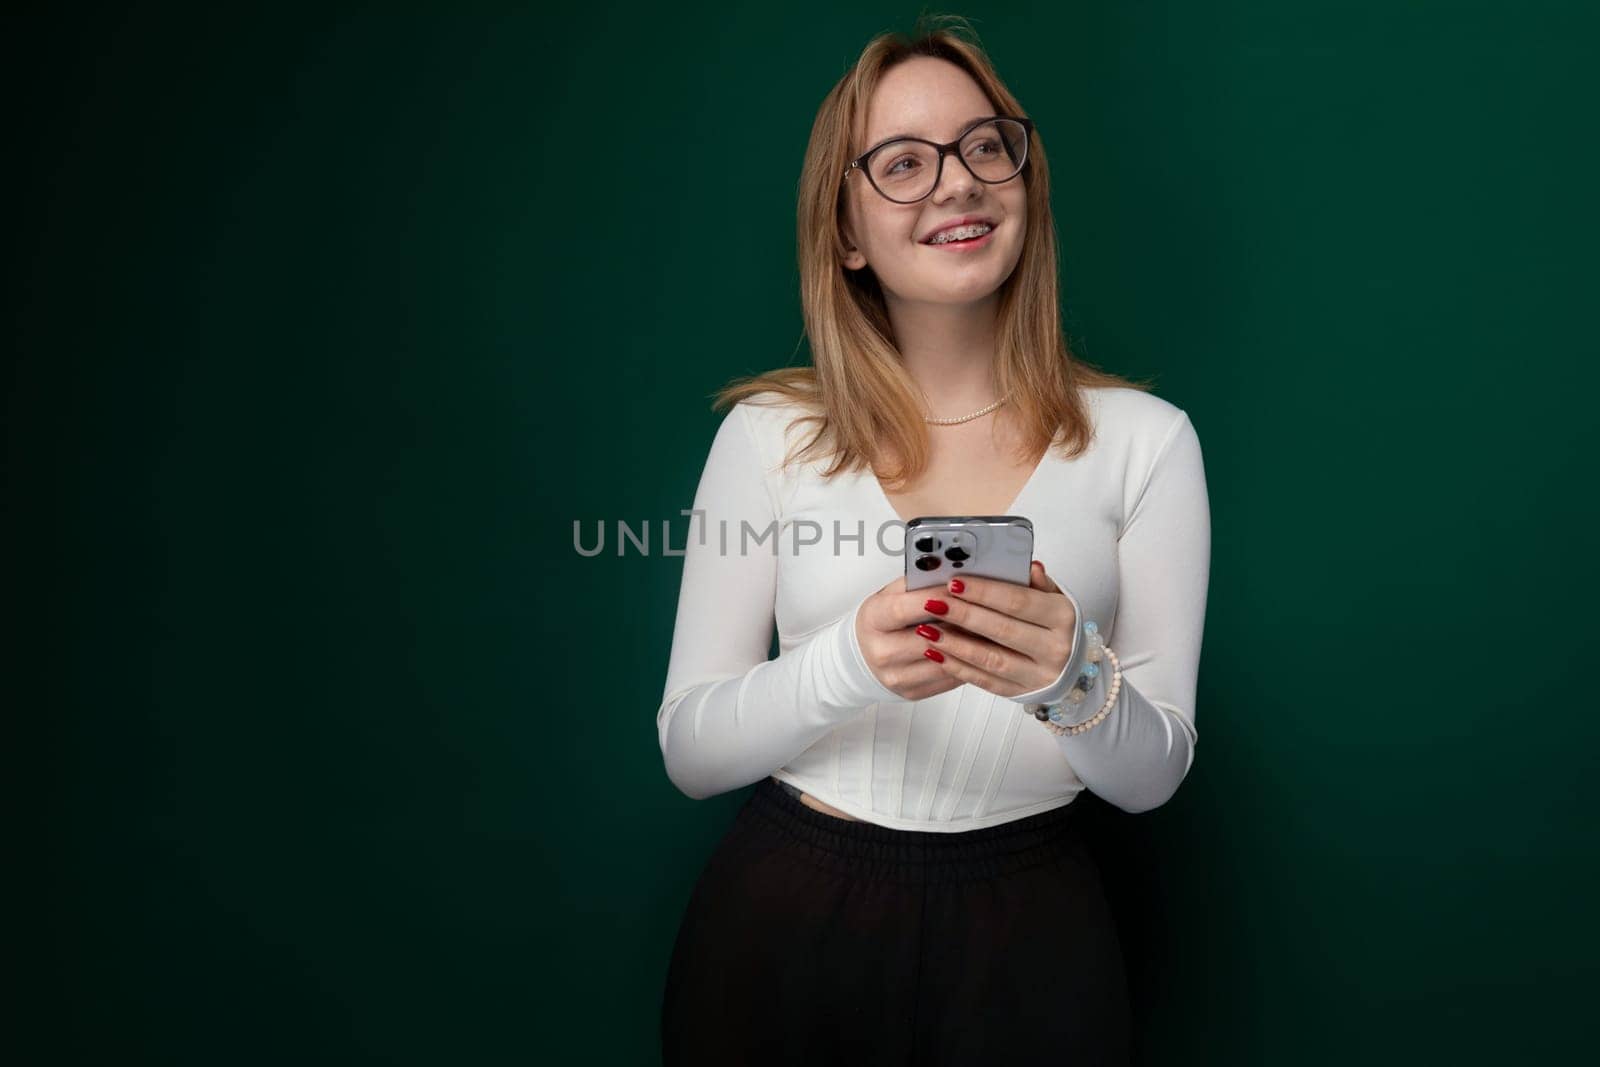 A woman with glasses is seen holding a cell phone in her hand, with her eyes focused on the screen. She appears engaged in the content on the device, possibly texting or browsing. The womans expression is intent, and her body language suggests concentration.